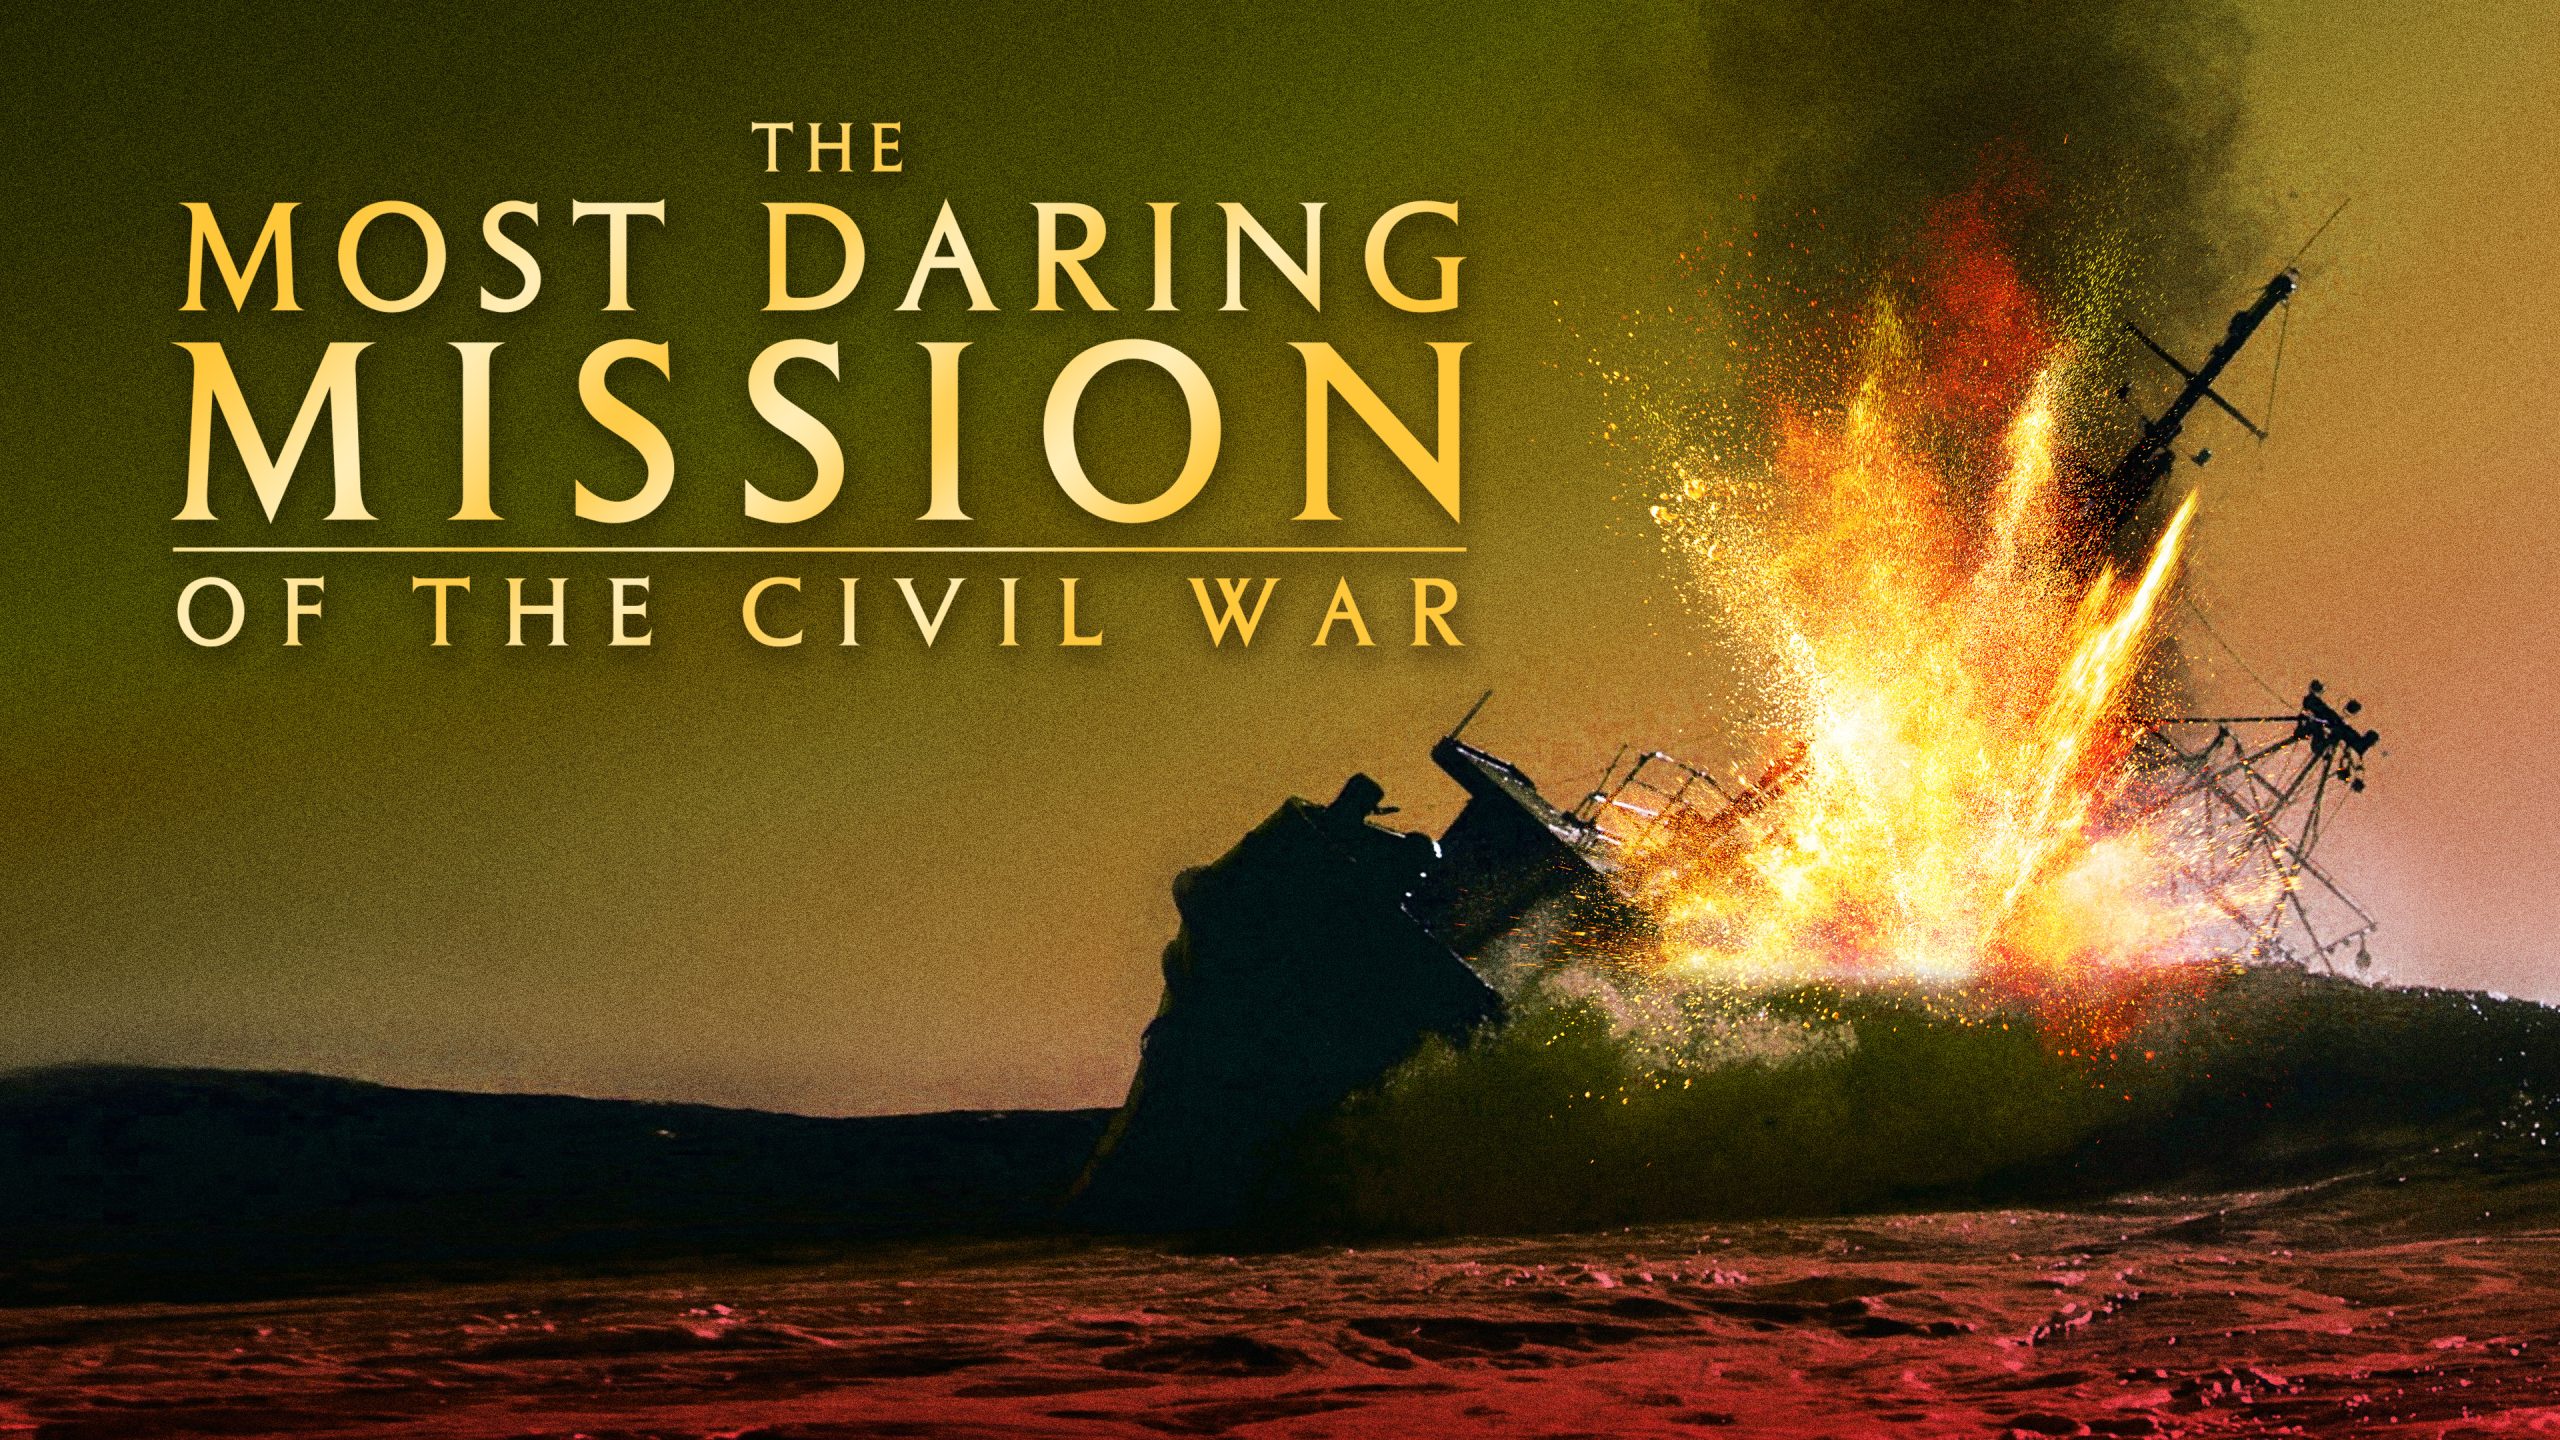 The Most Daring Mission The American Civil War